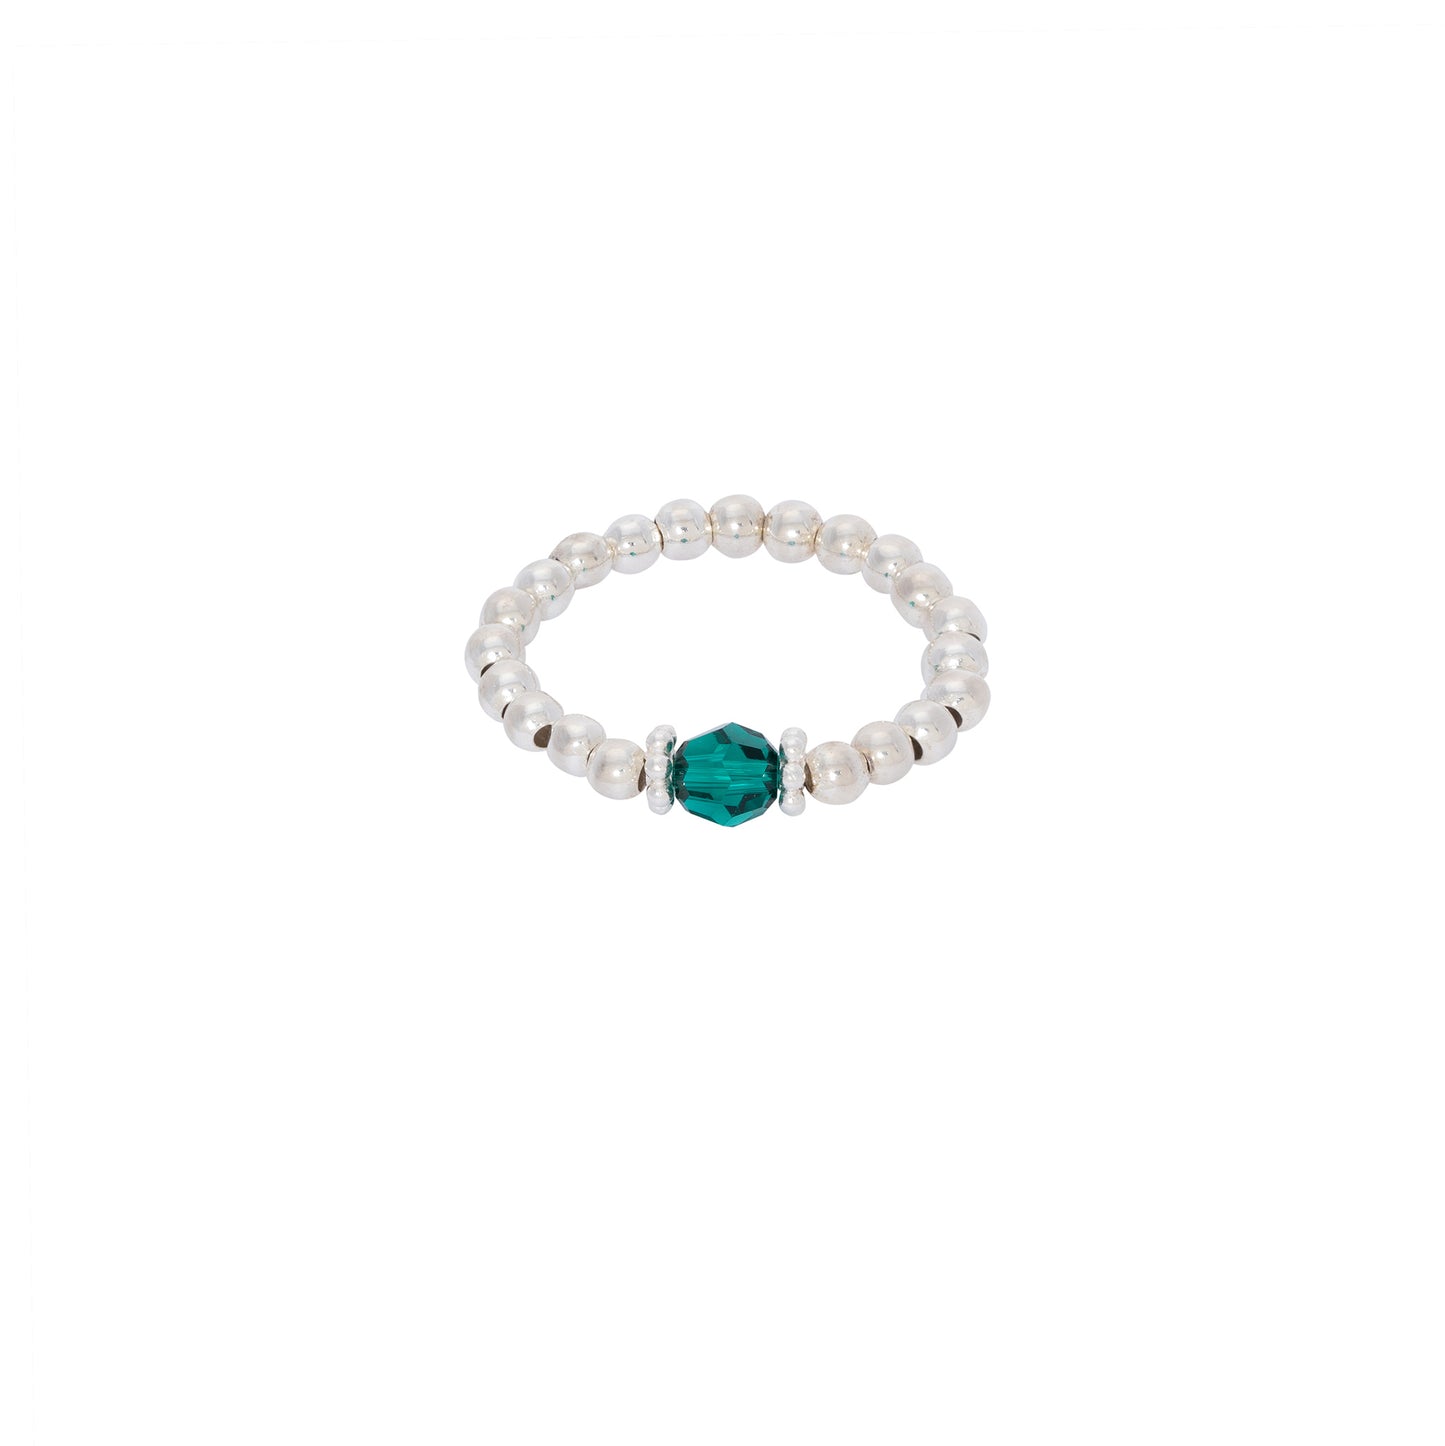 A beaded ring featuring small, round, pearly beads and a larger emerald green faceted bead at the center. The sterling silver design is simple and elegant, with a minimalist aesthetic. This Emerald Birthstone Ring by Made Here with Love is displayed against a plain white background.